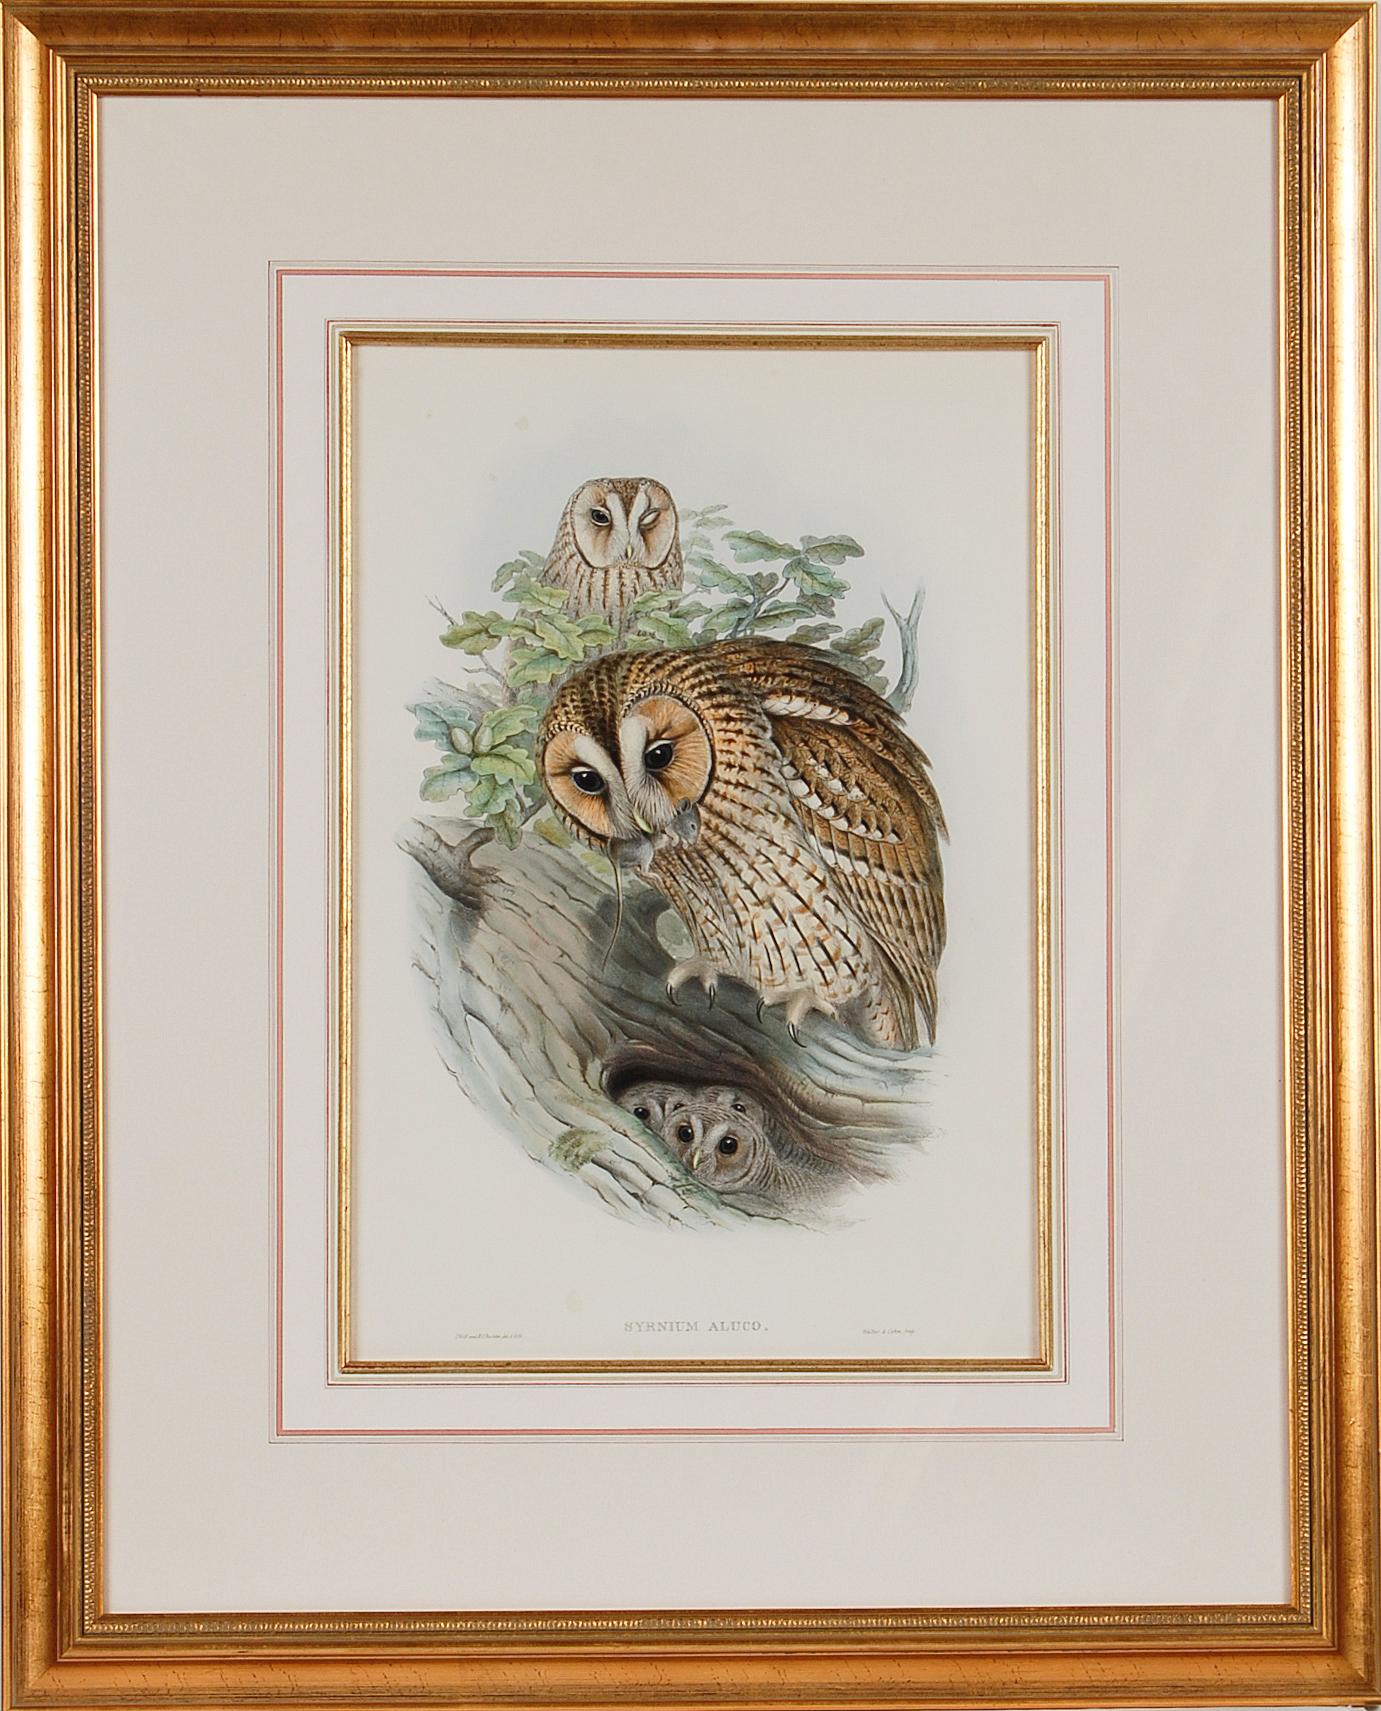 John Gould and Henry Constantine Richter Animal Print - Tawny or Brown Owl: A Framed Original 19th C. Hand-colored Lithograph by Gould